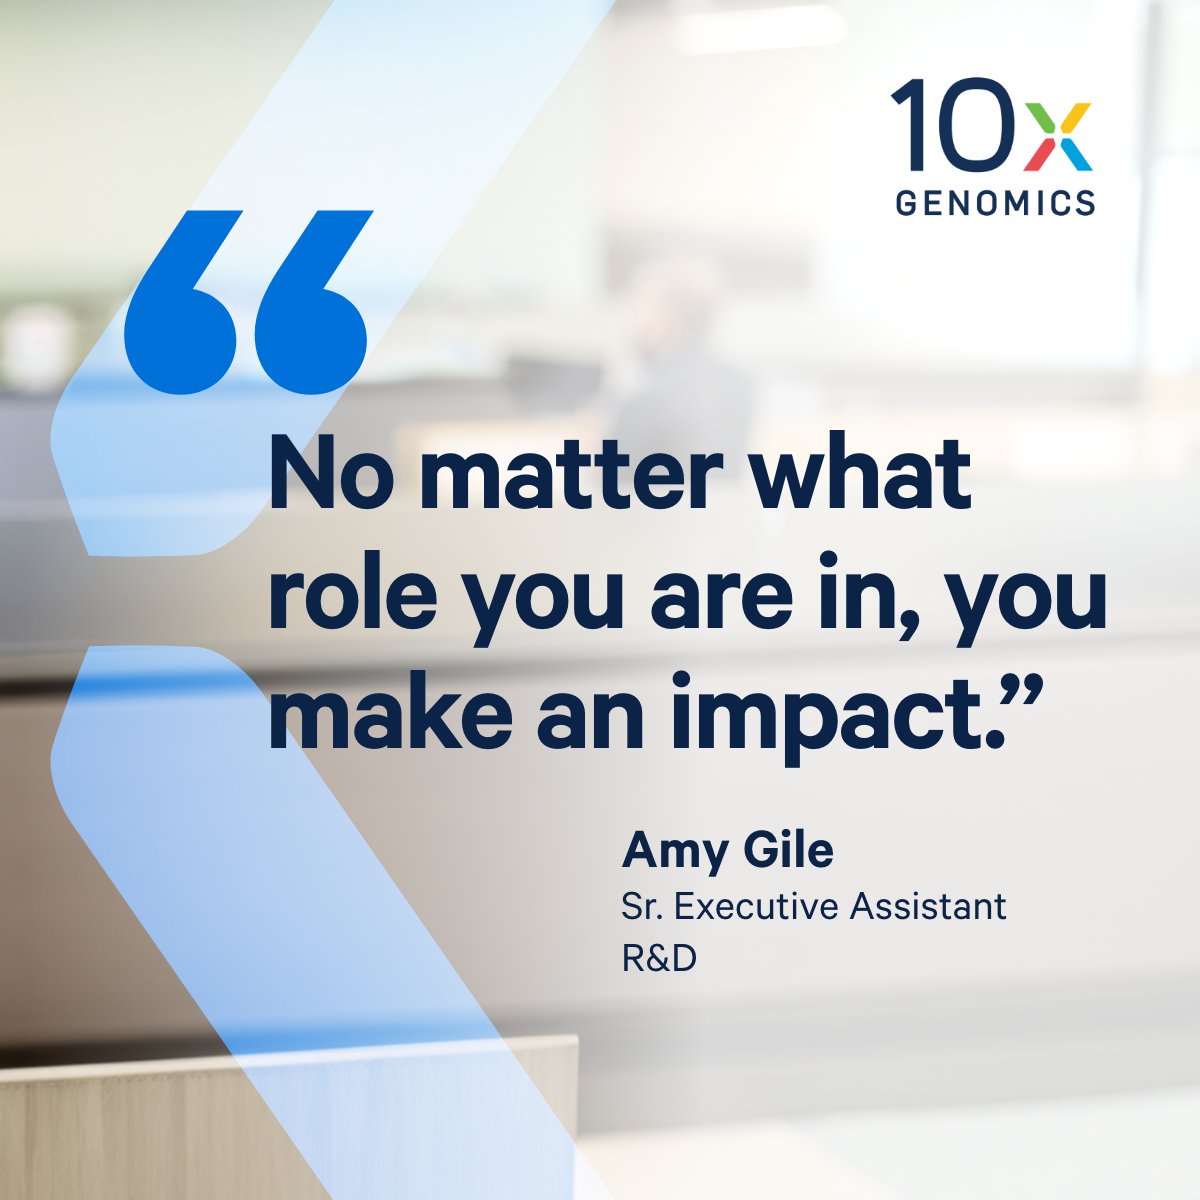 Every 10xer is a main character. “No matter what role you’re in, you make an impact,” says 10xer Amy Gile. “The executive support team & I enable the rest of the organization to remain focused on our core mission.” See how you fit in the story: bit.ly/49XR4Cp